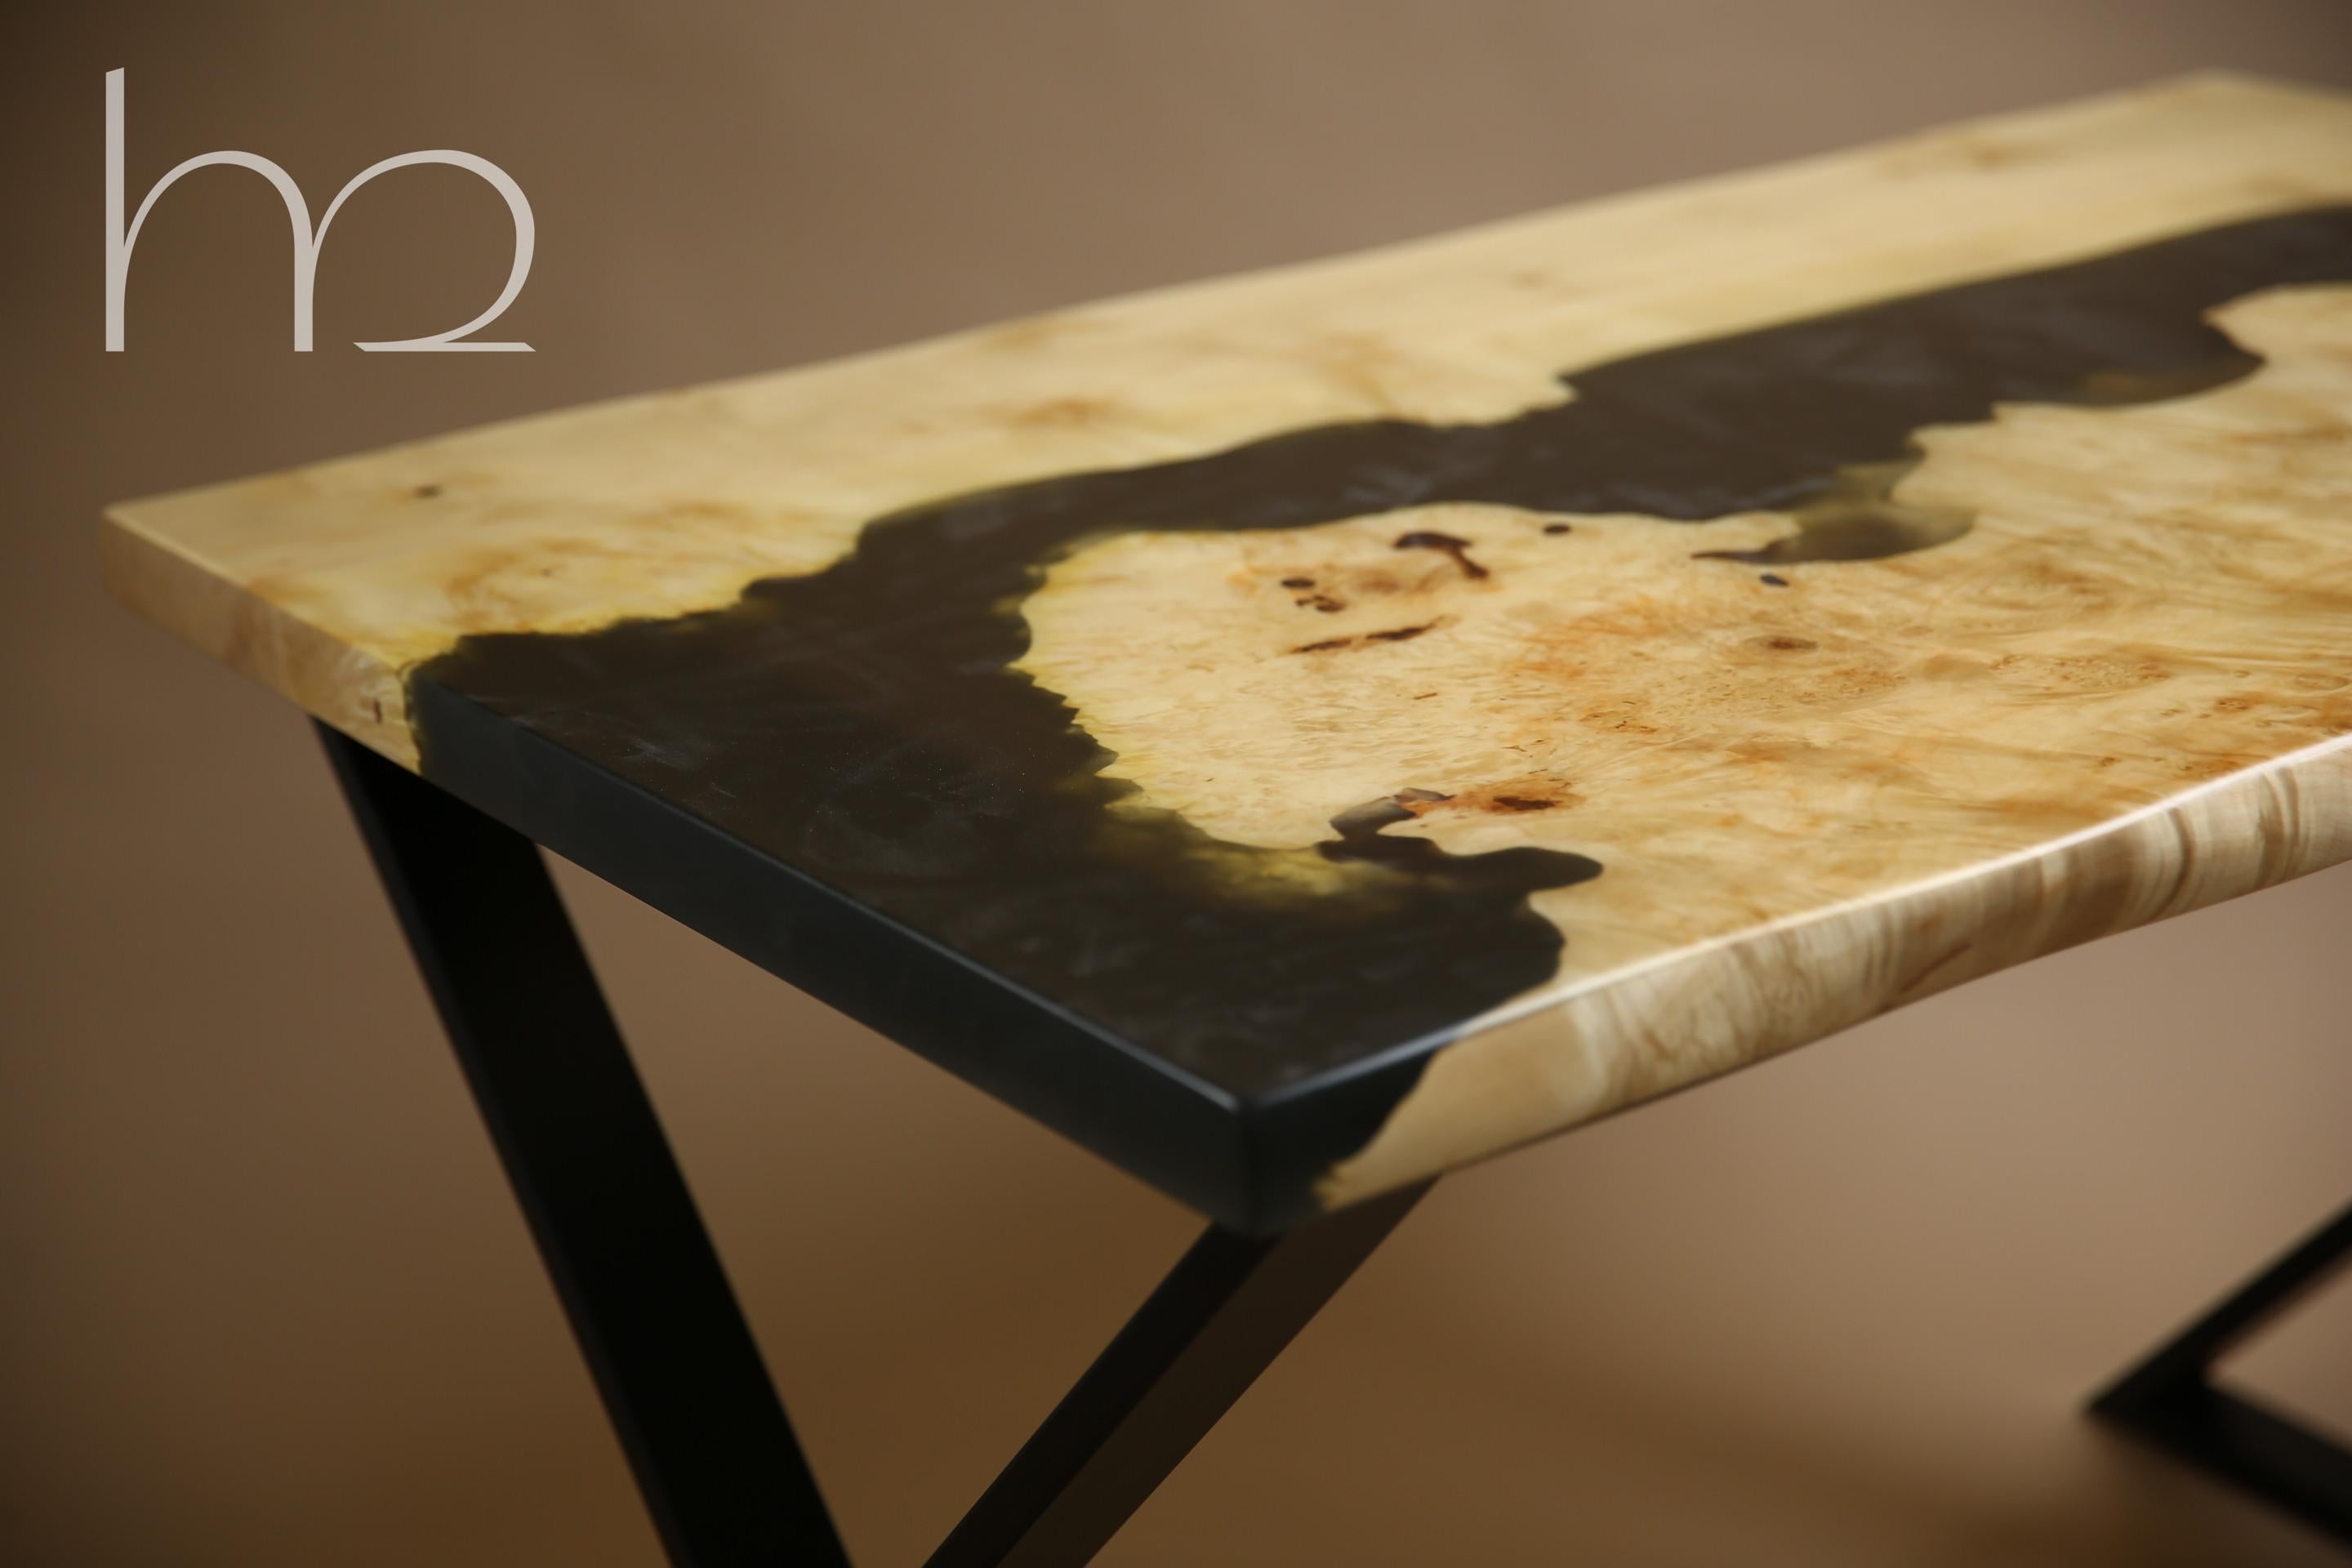 Do you like contrasts? I think that life is made up of contrasts. Cold and heat, thirst and satiety, poverty and abundance, difficult circumstances and victory over them.
This table is made from old white maple slabs and black epoxy. Contrast